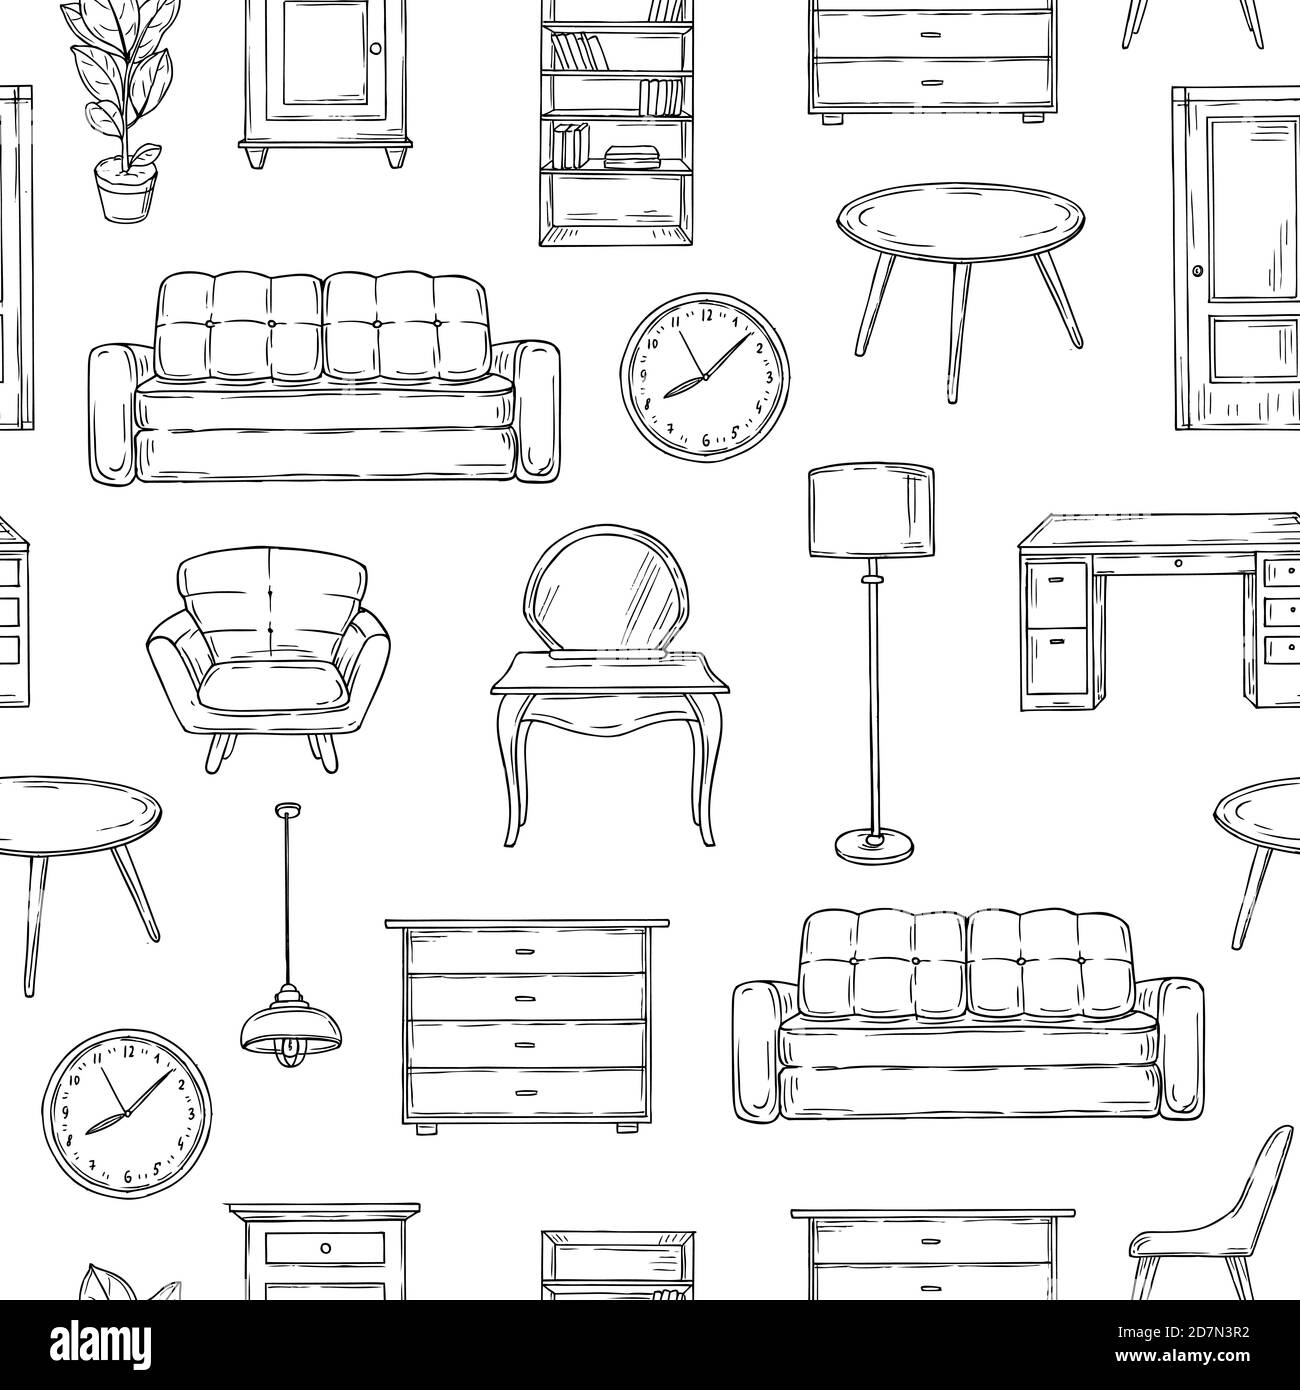 Sketch furniture pattern. Living room doodle vintage interior vector isolated wallpaper texture. Illustration interior table and sofa, chair and lamp, furniture pattern endless Stock Vector